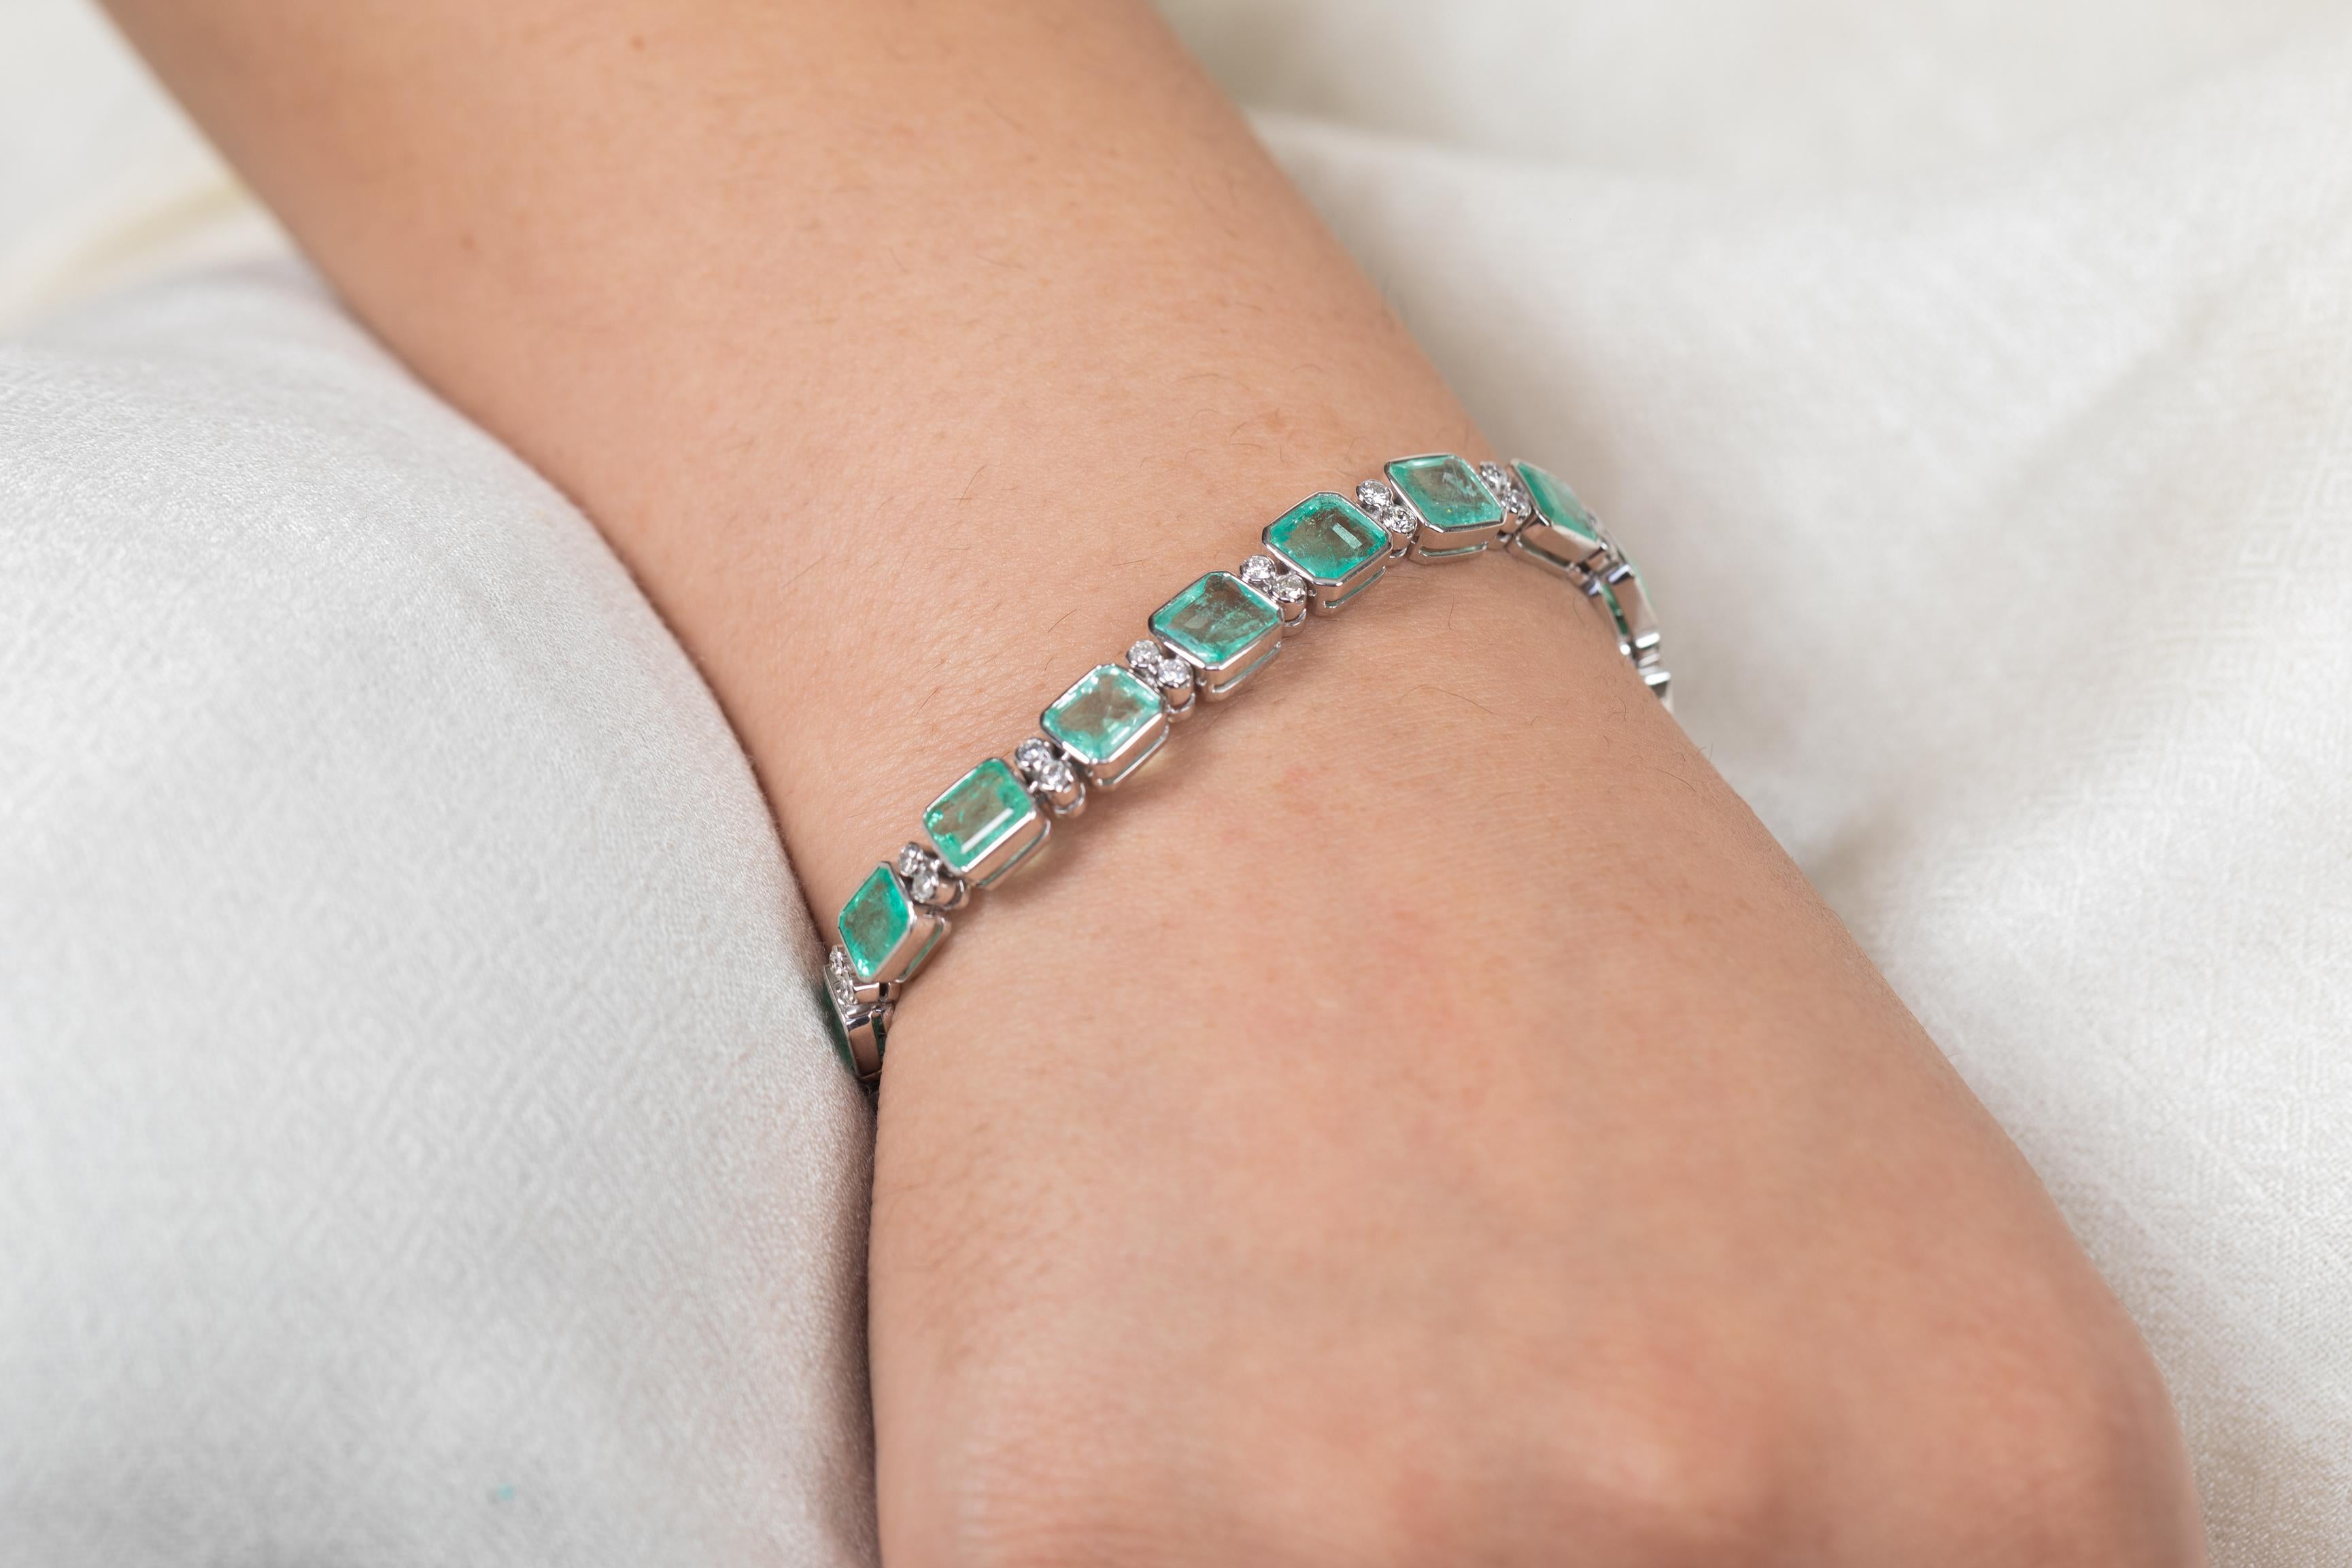 33.58 Carat Octagon Cut Emerald Tennis Bracelet with Diamonds in 18K White Gold For Sale 2